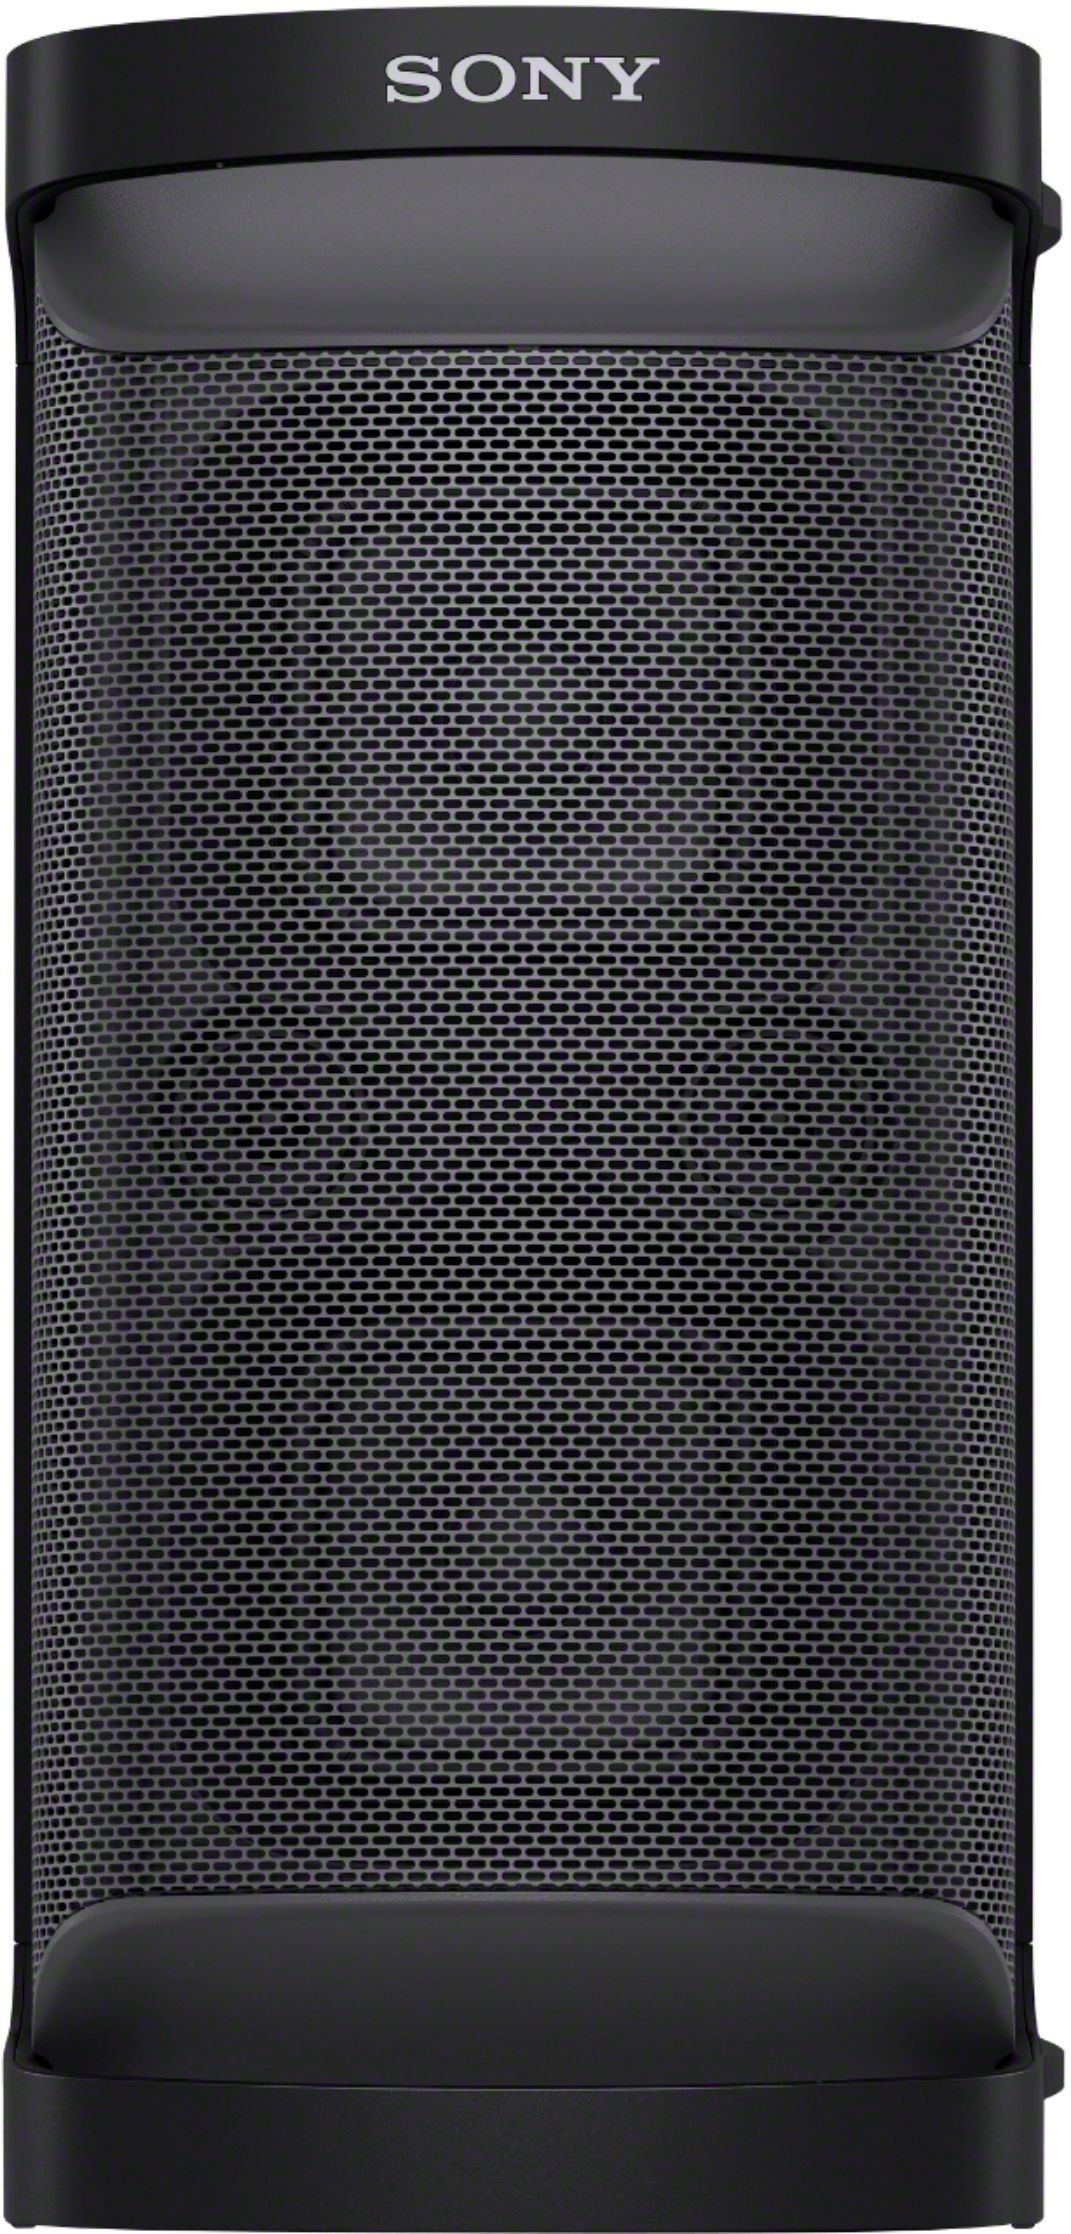 XP500 Black Resistance with Best Sony Bluetooth Party Speaker Water SRSXP500 Buy - Portable